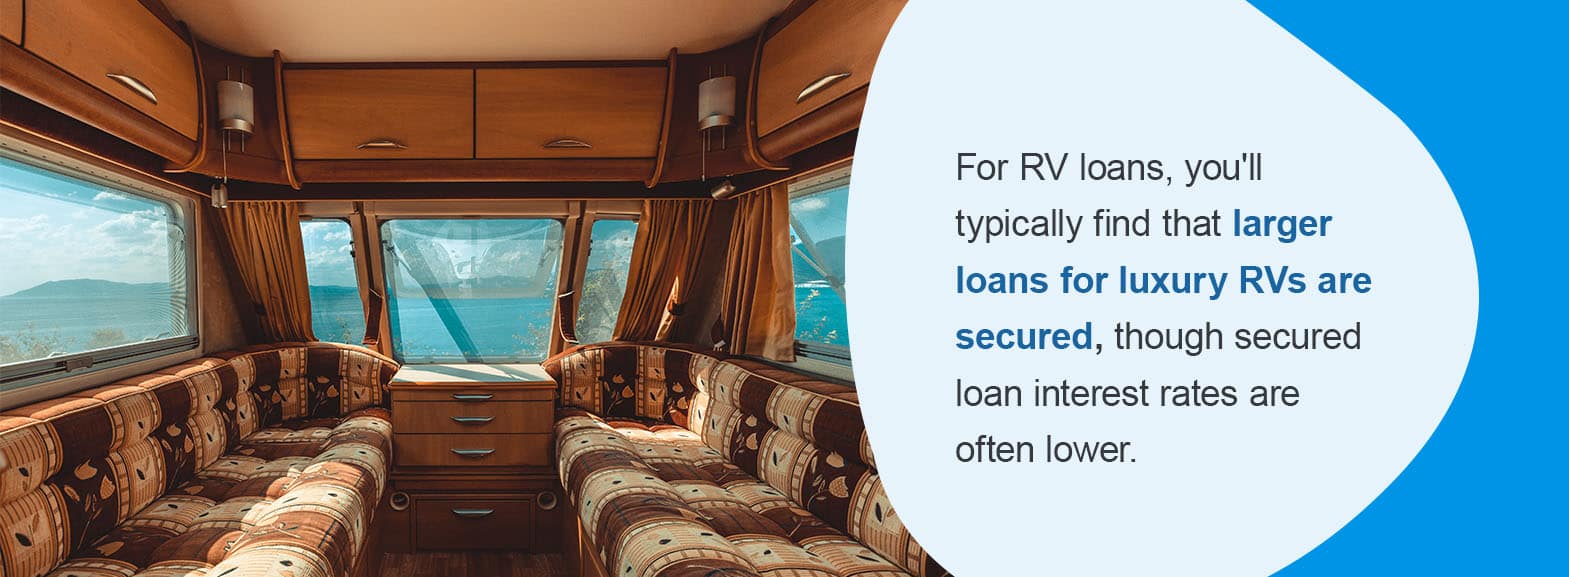 For RV loans, you'll typically find that larger loans for luxury RVs are secured since the risk is higher to lenders, though secured loan interest rates are often lower. 